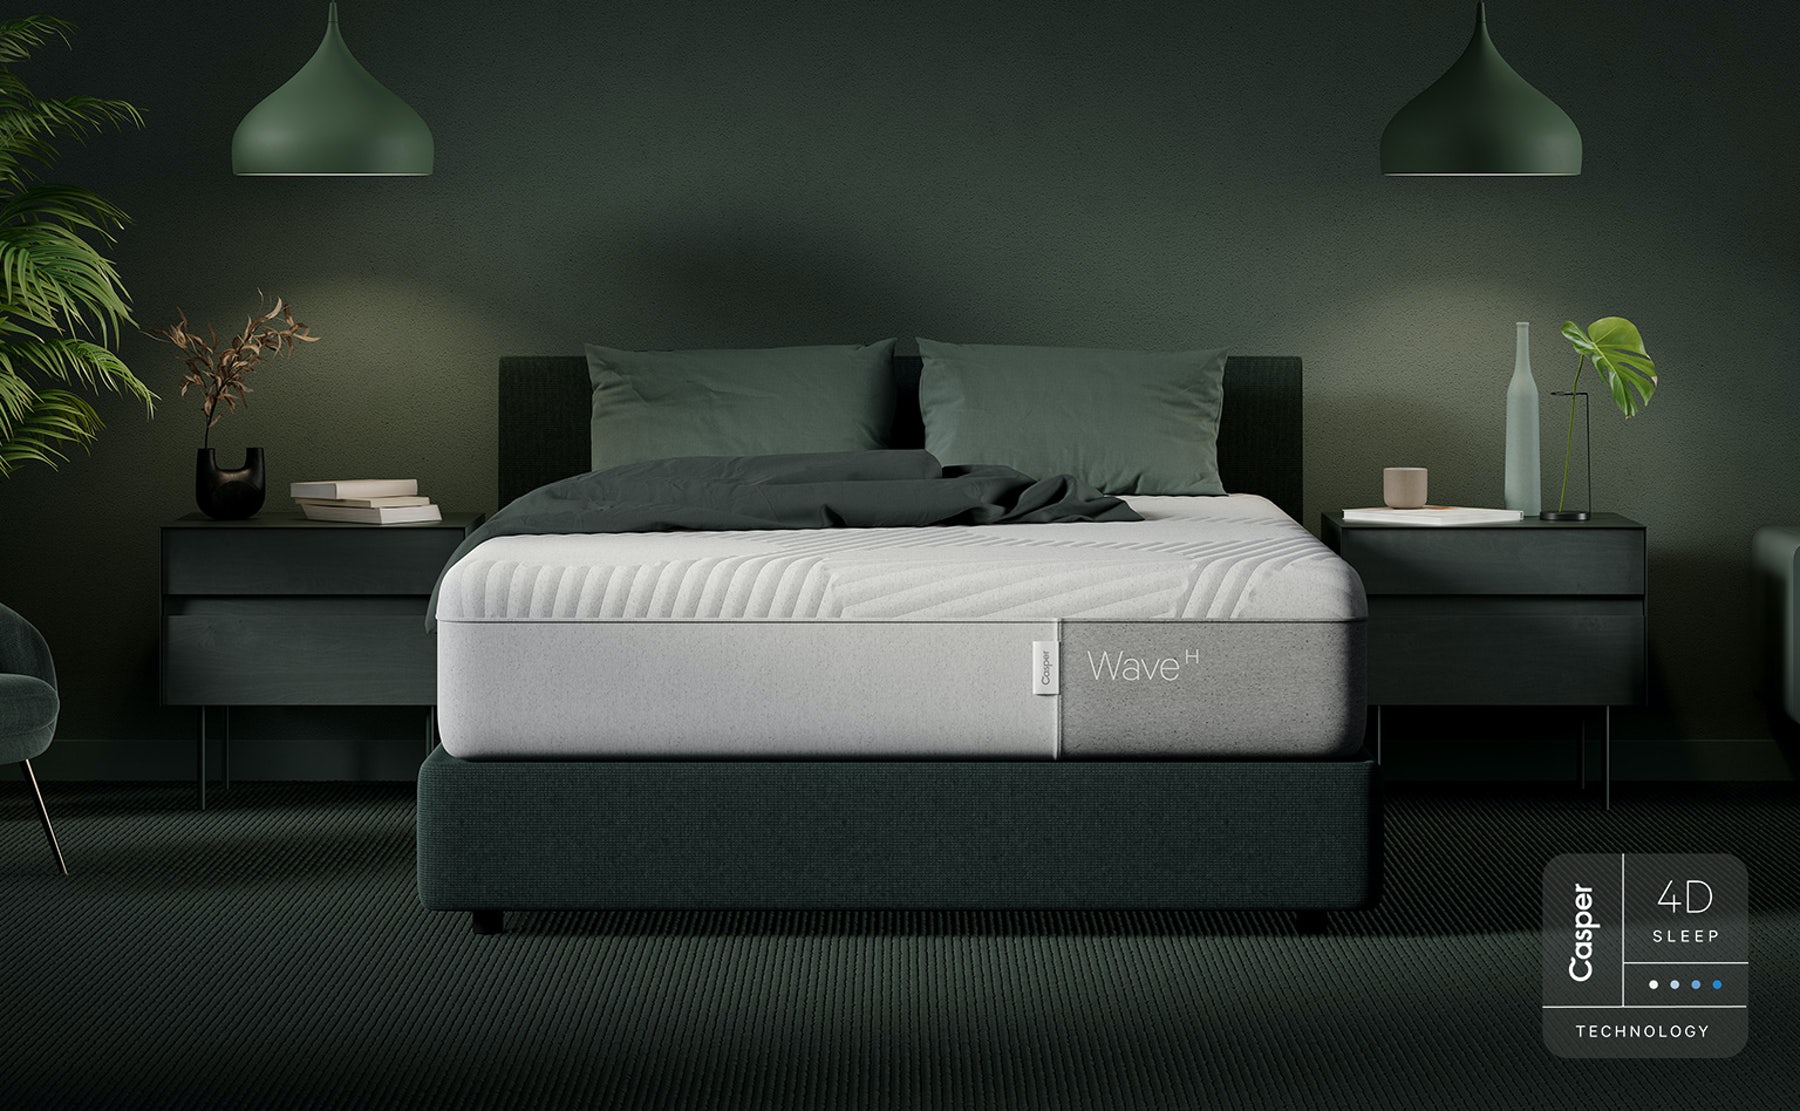 Casper Mattress Presidents Day 2023 Sale & Deals – What To Expect